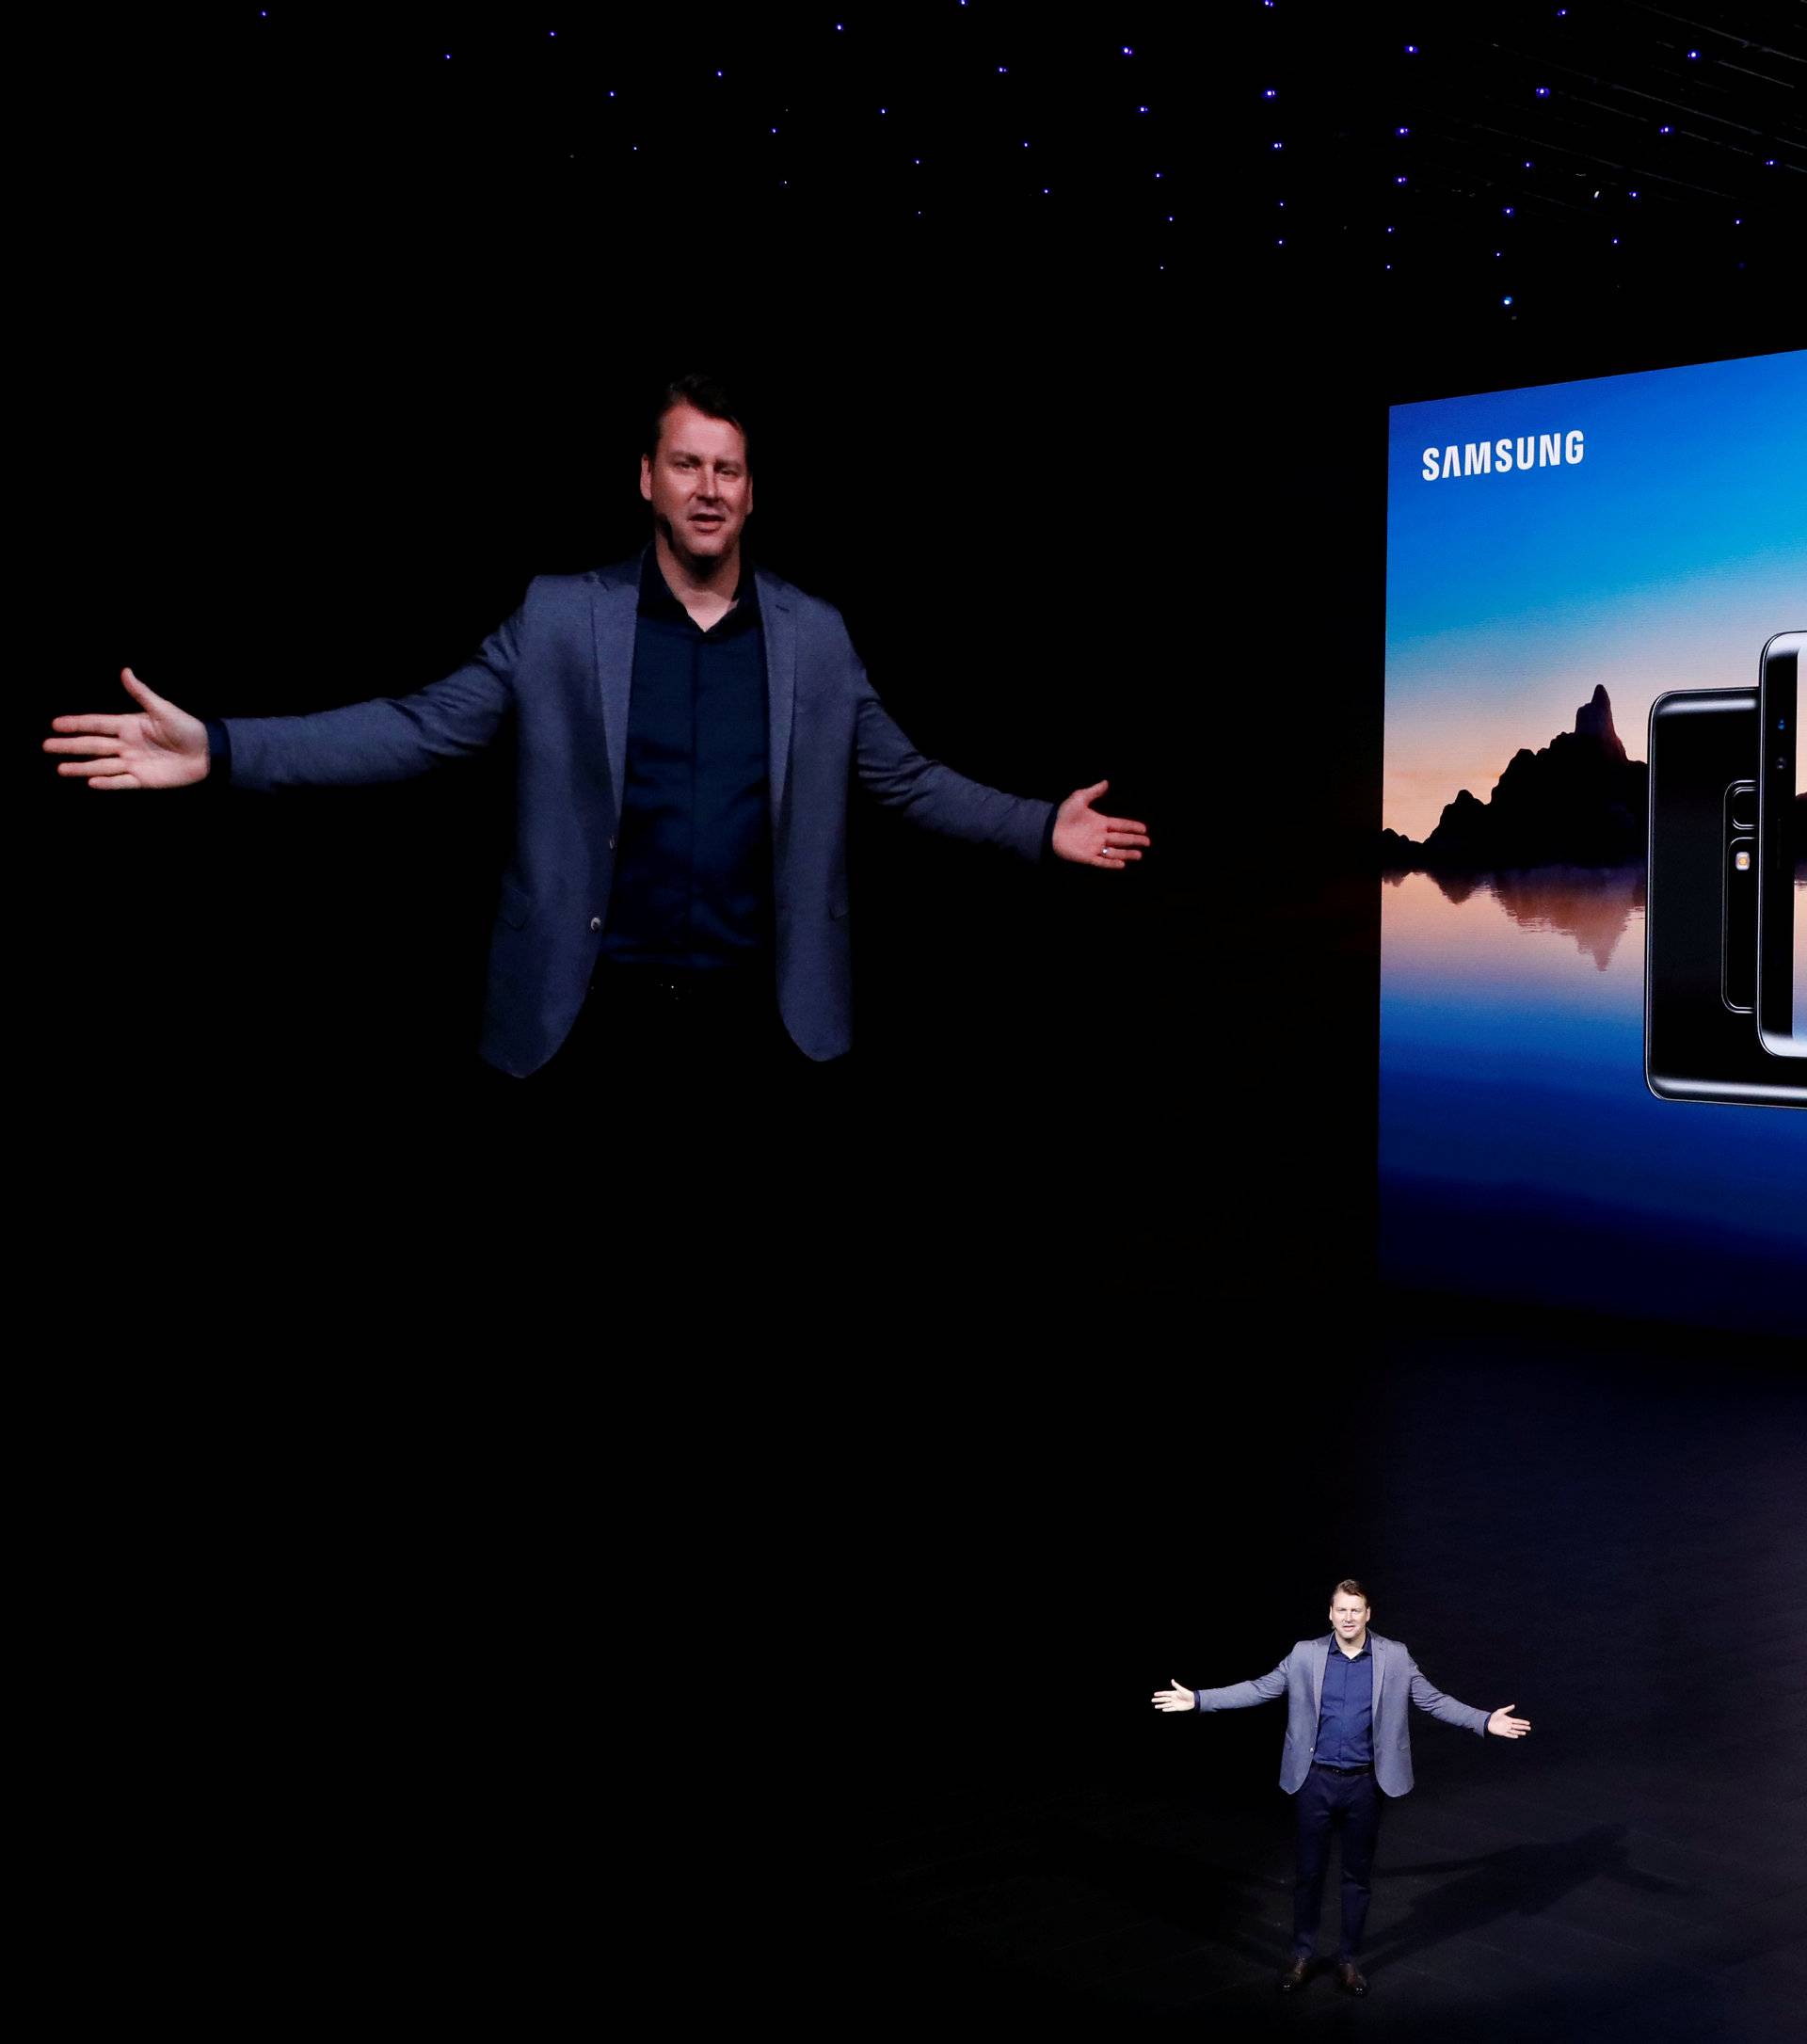 Justin Denison, Senior Vice President of Samsung Electronics' Mobile Communications introduces the Galaxy Note 8 smartphone during a launch event in New York City